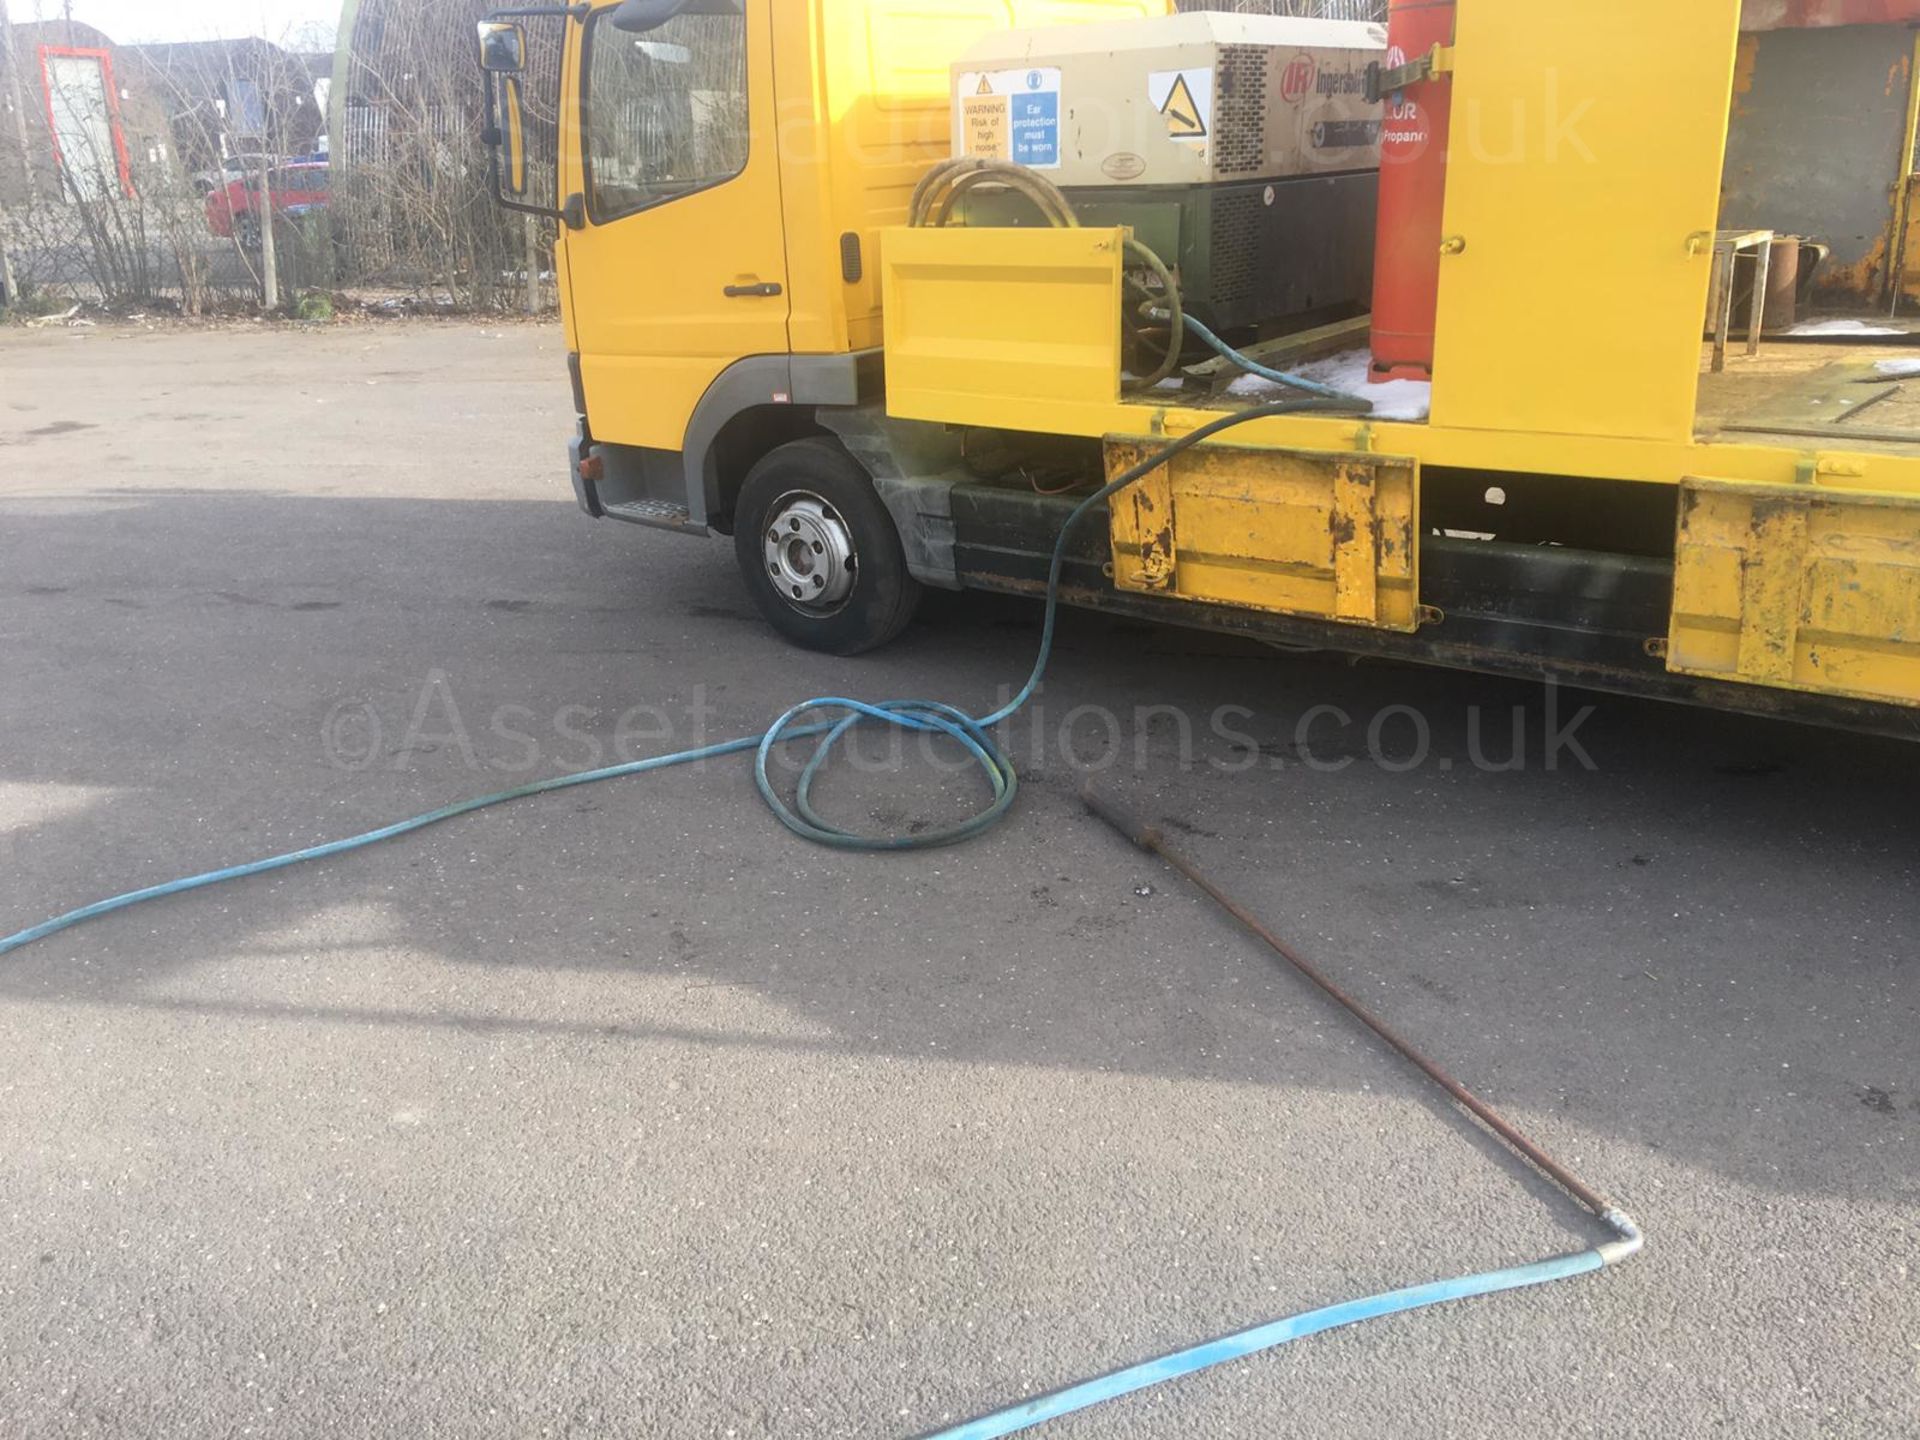 2004/54 REG MERCEDES ATEGO 1018 DAY YELLOW DROPSIDE LINE PAINTING LORRY 4.3L DIESEL ENGINE *NO VAT* - Image 7 of 62